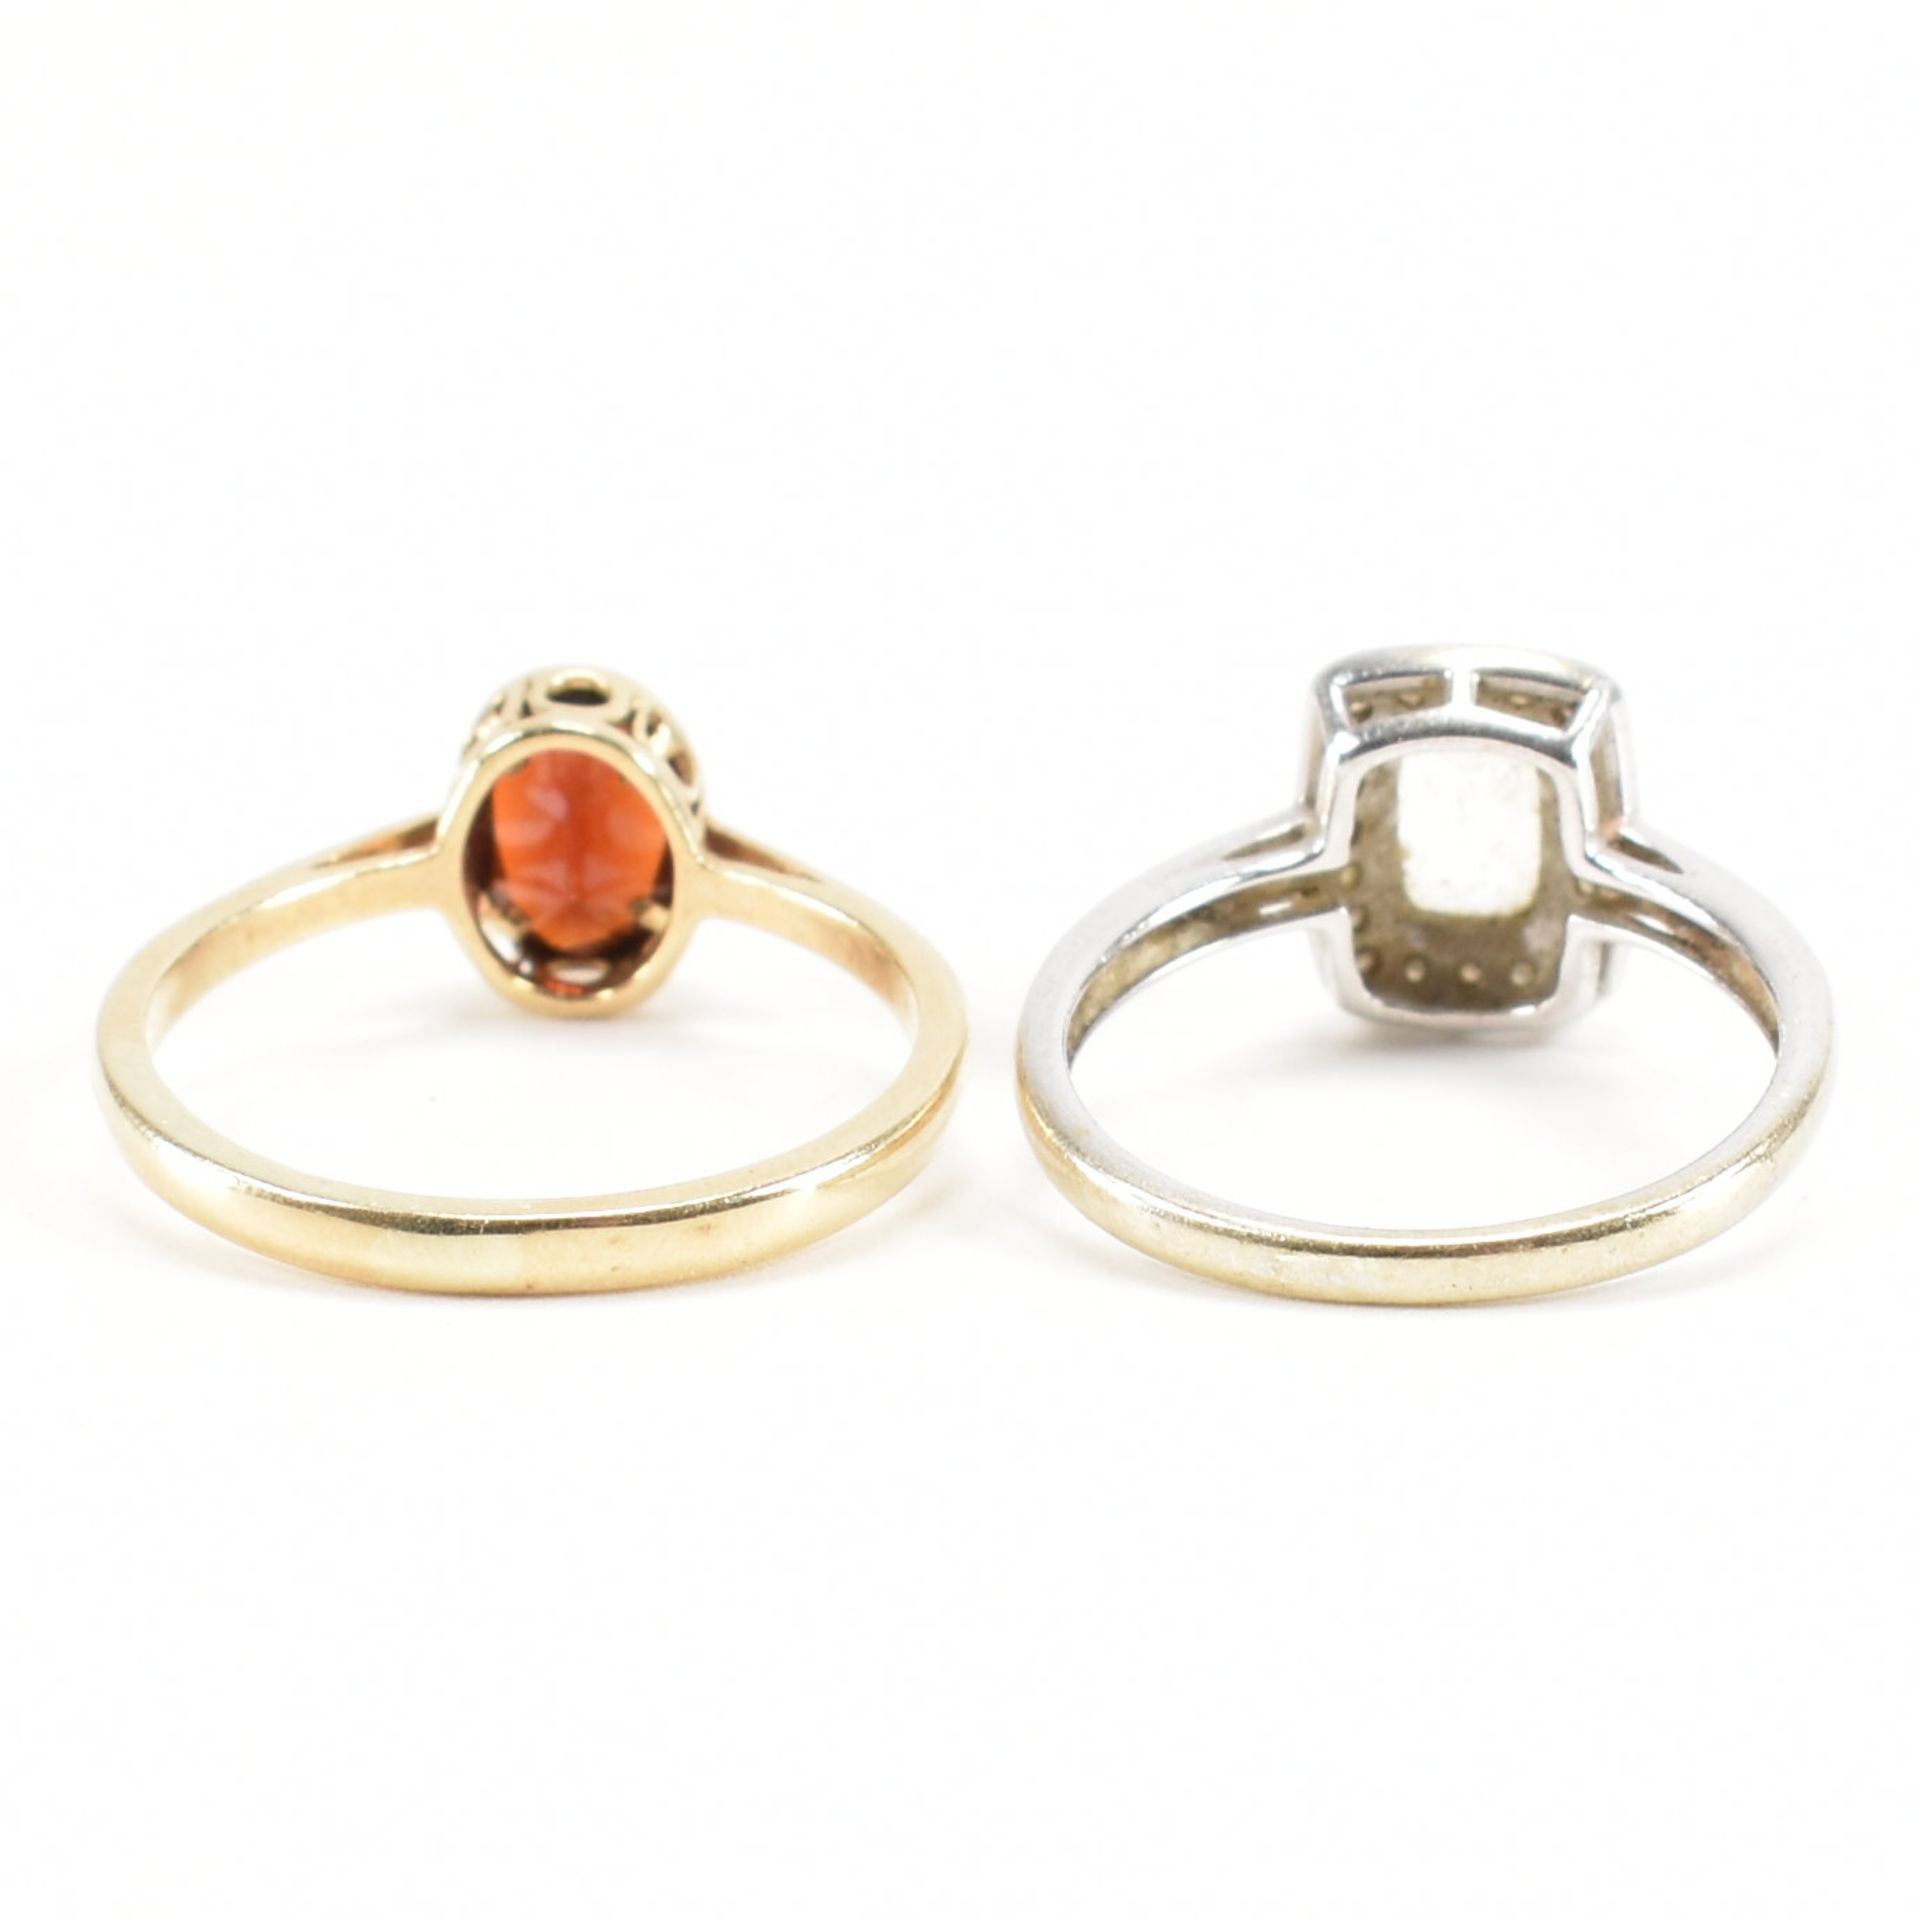 TWO HALLMARKED 9CT GOLD STONE SET RINGS - Image 4 of 8